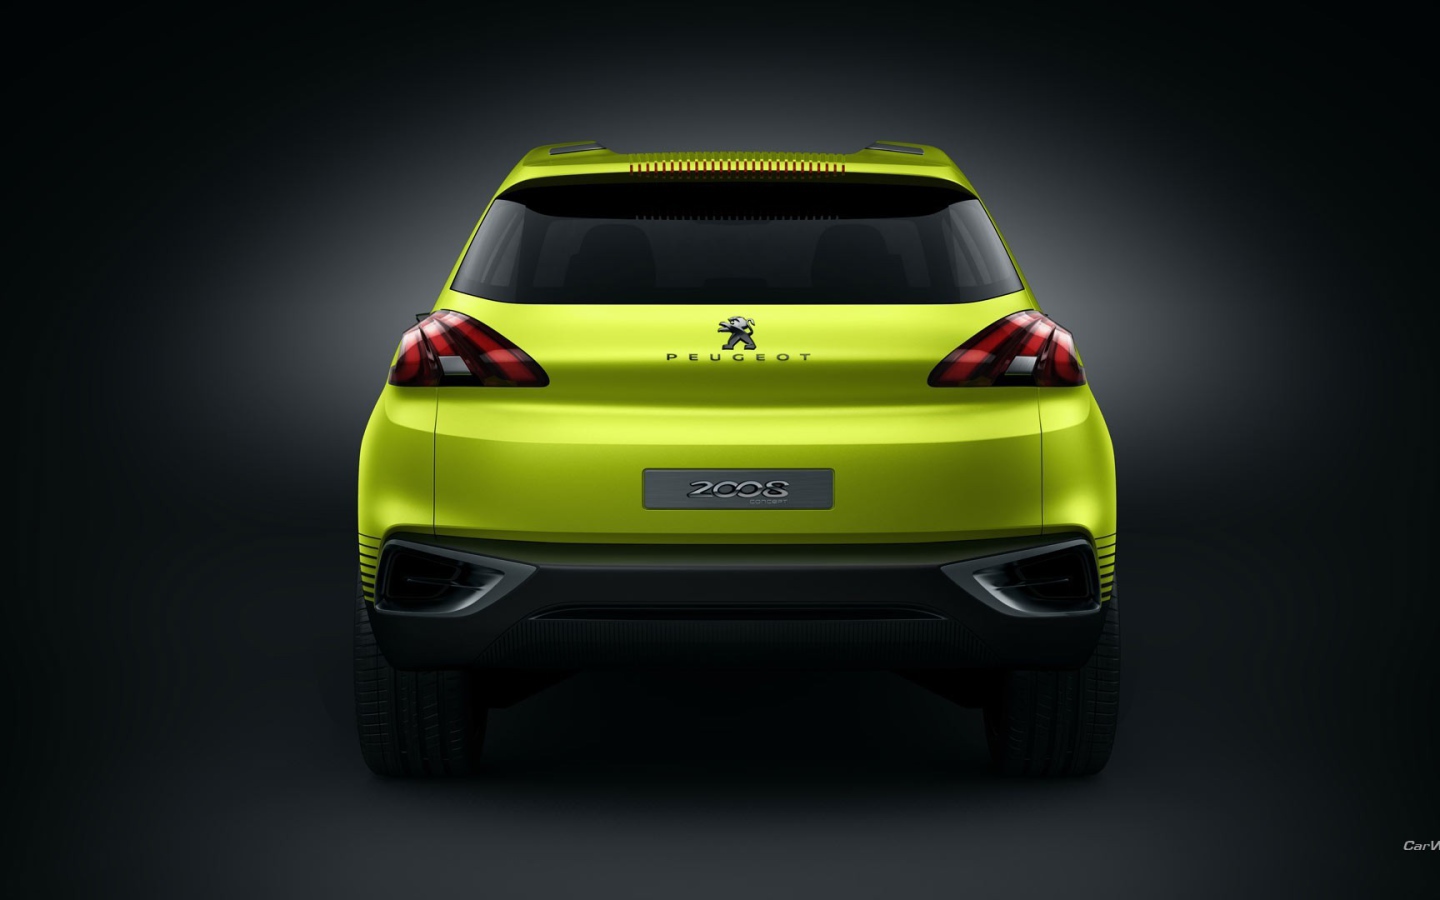 Rear view of the yellow Peugeot 2008